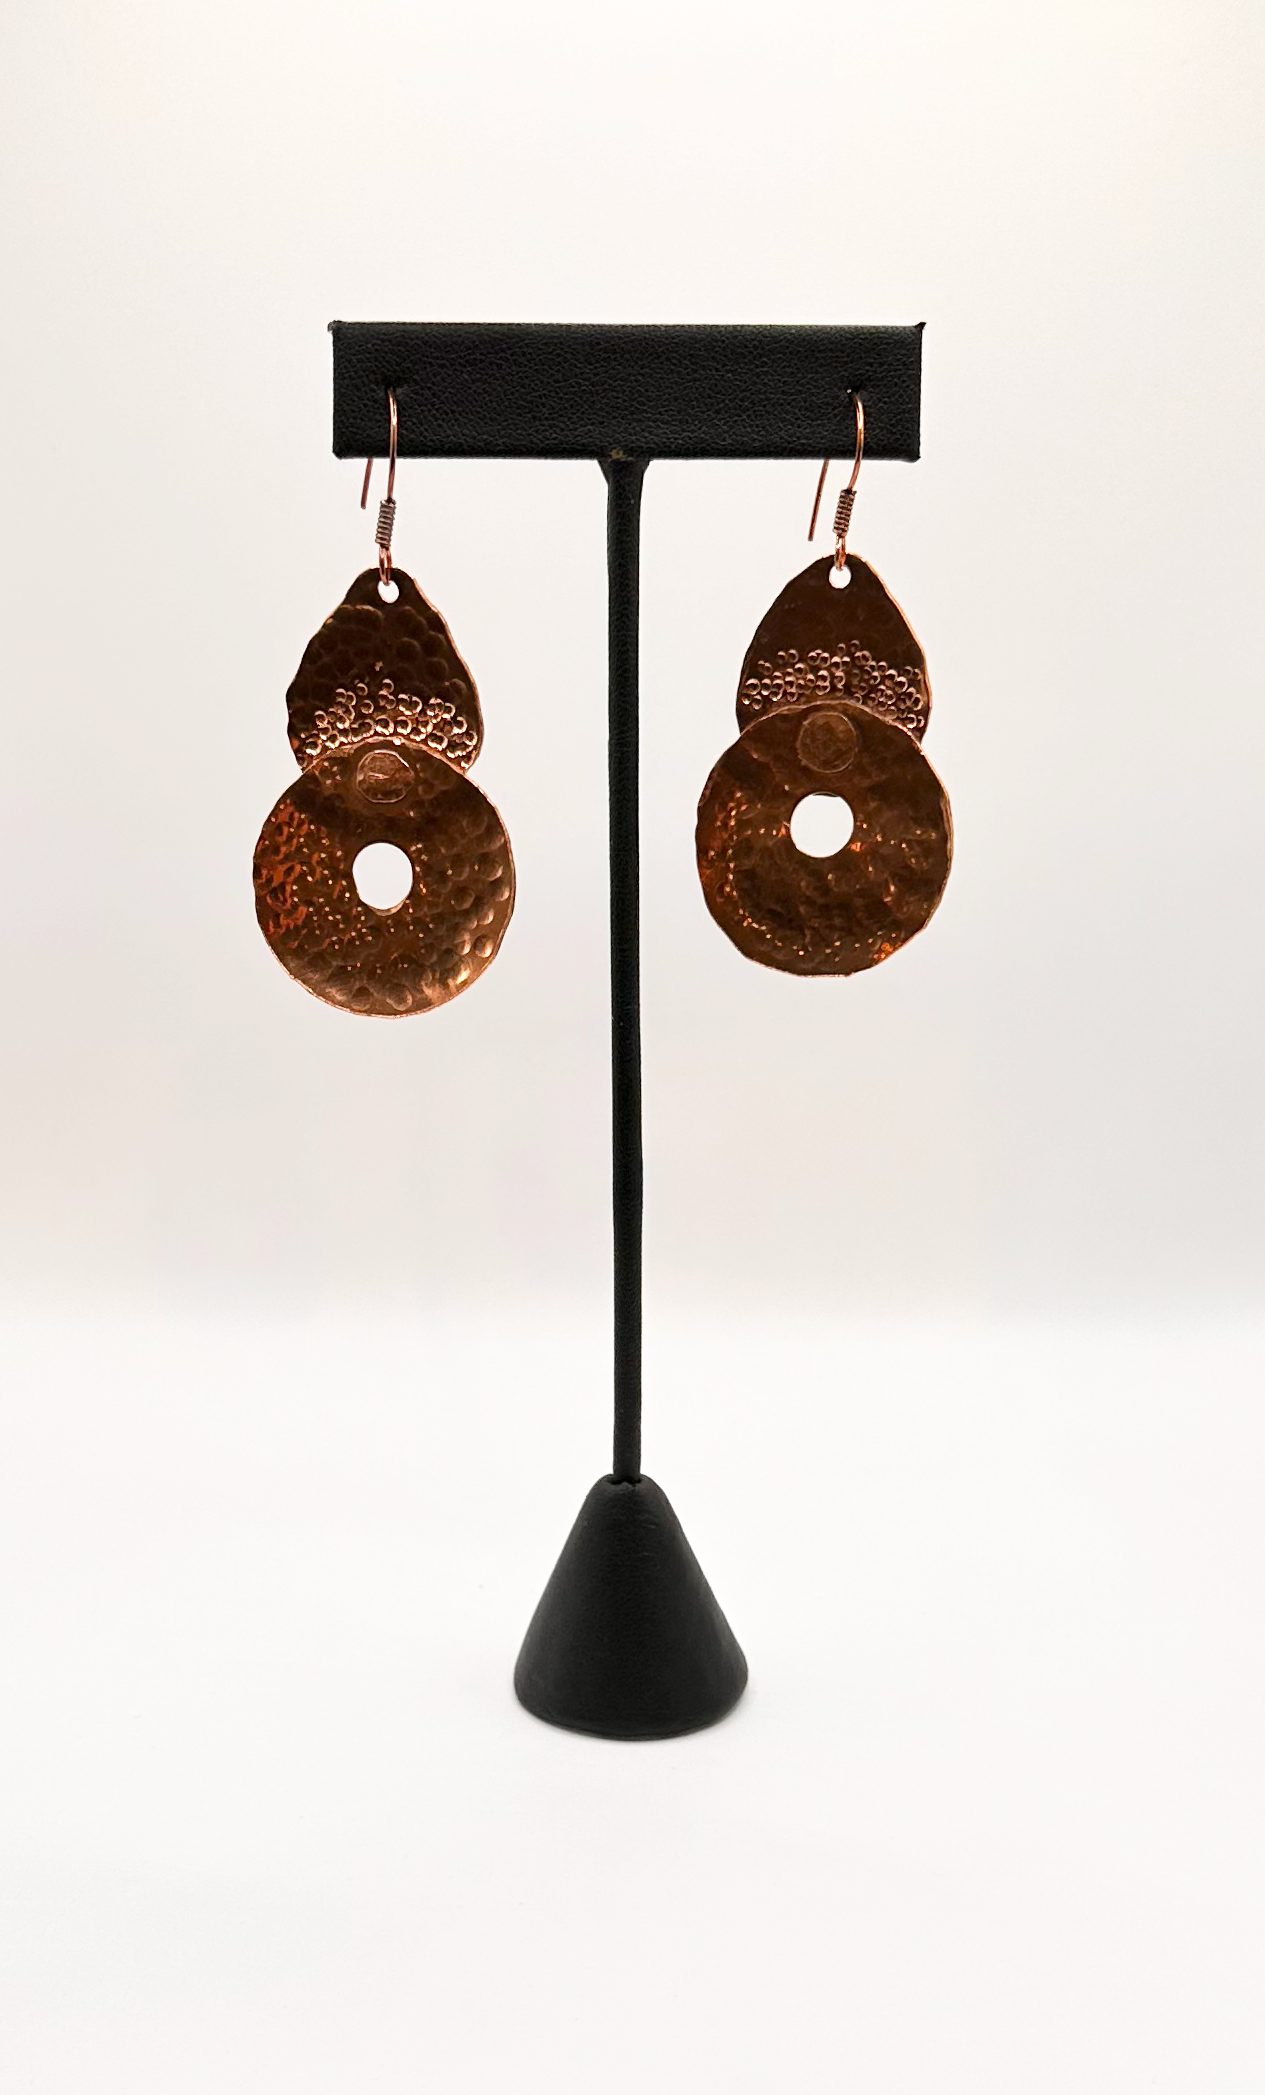 Artisan Crafted Hammered Copper Earrings